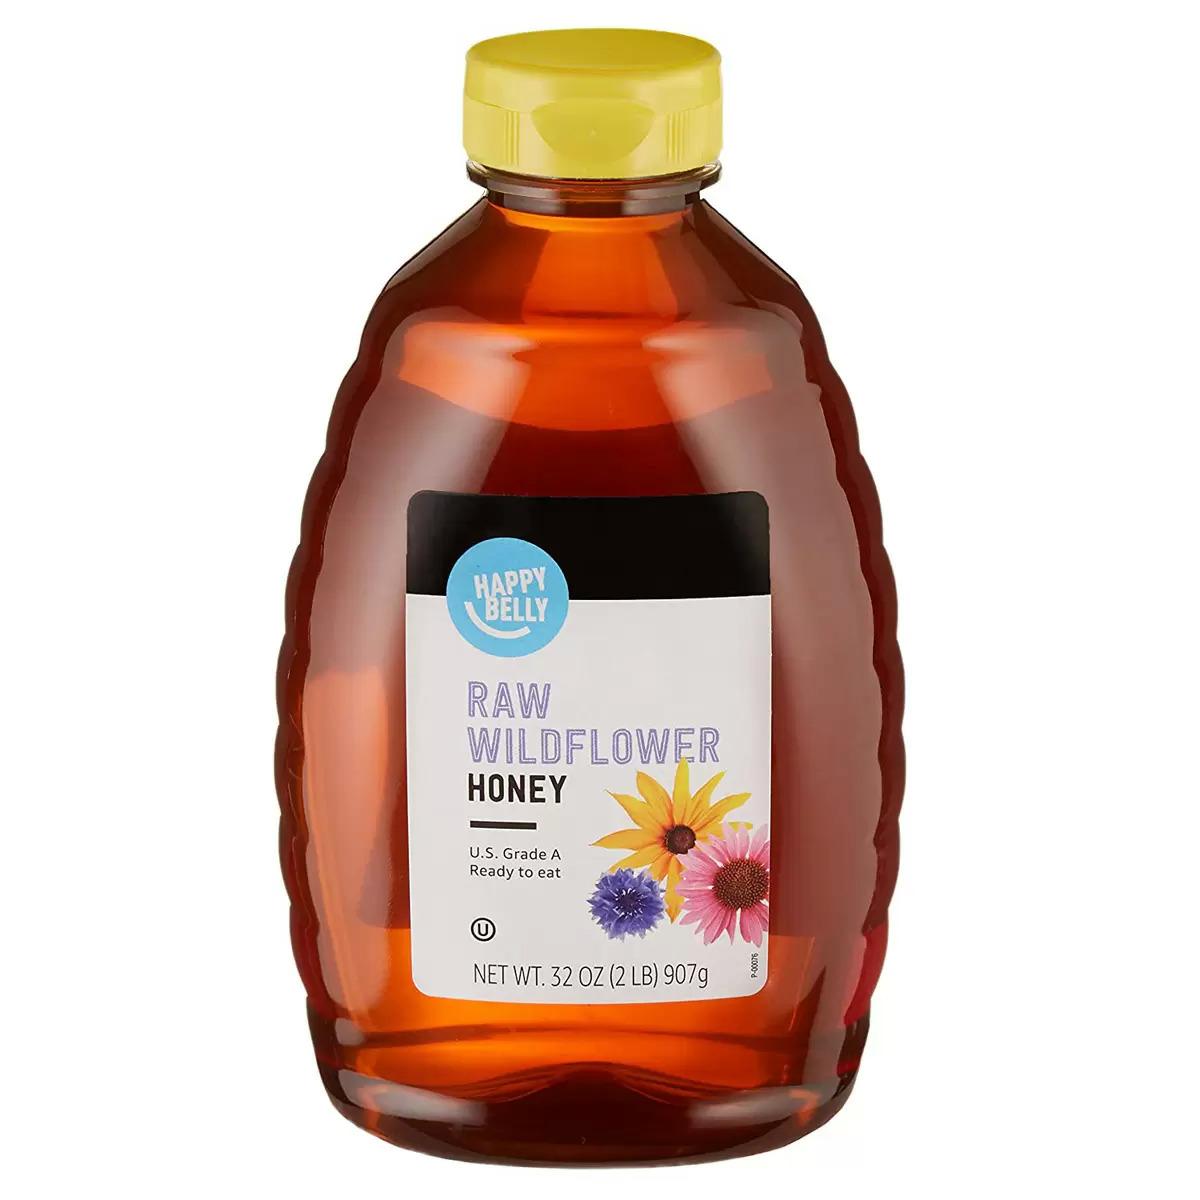 Happy Belly 32Oz Raw Wildflower Honey for $7.05 Shipped